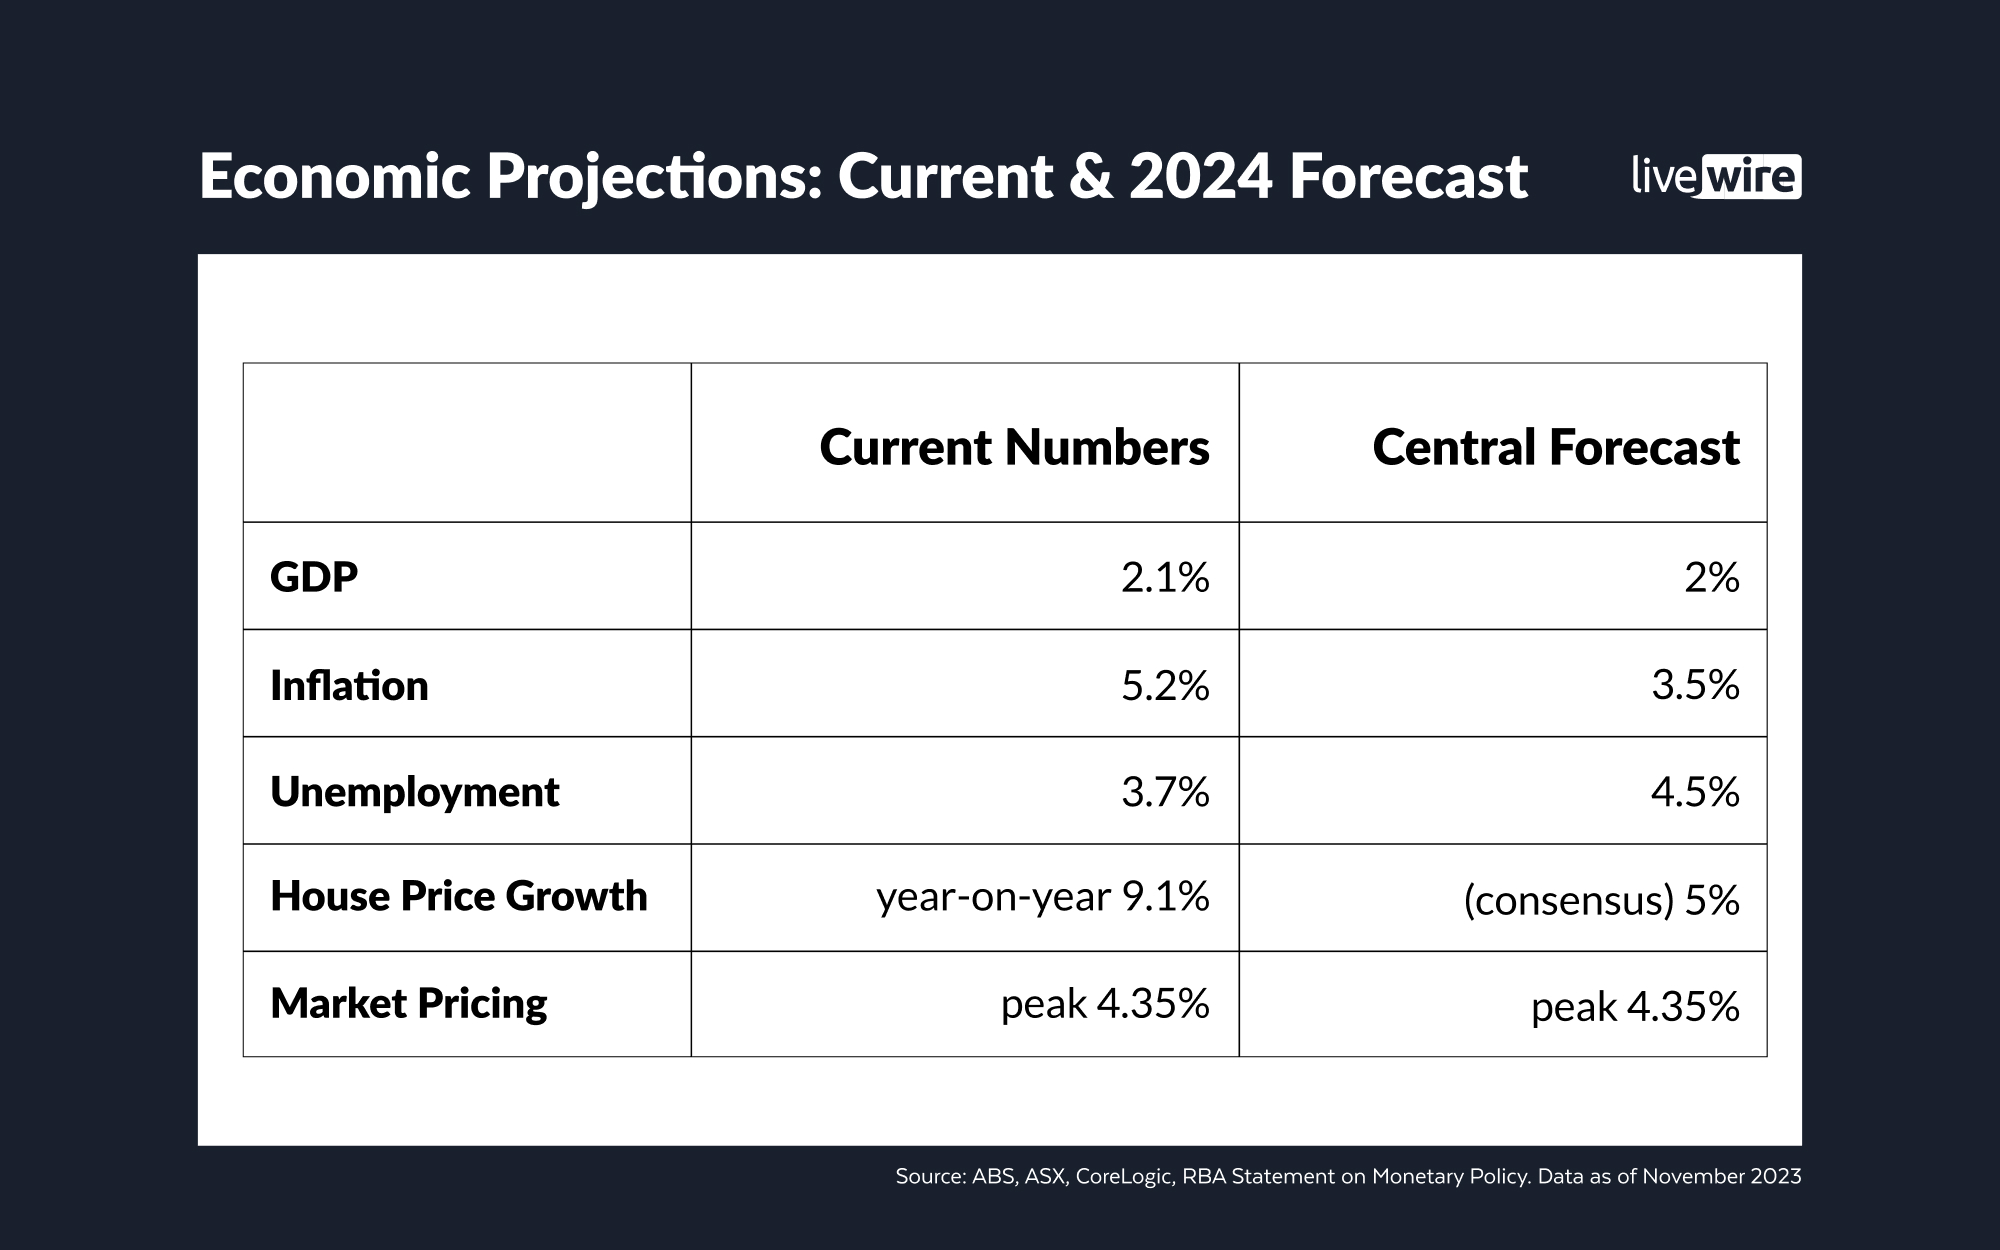 Economic projections - Current and 2024 forecast